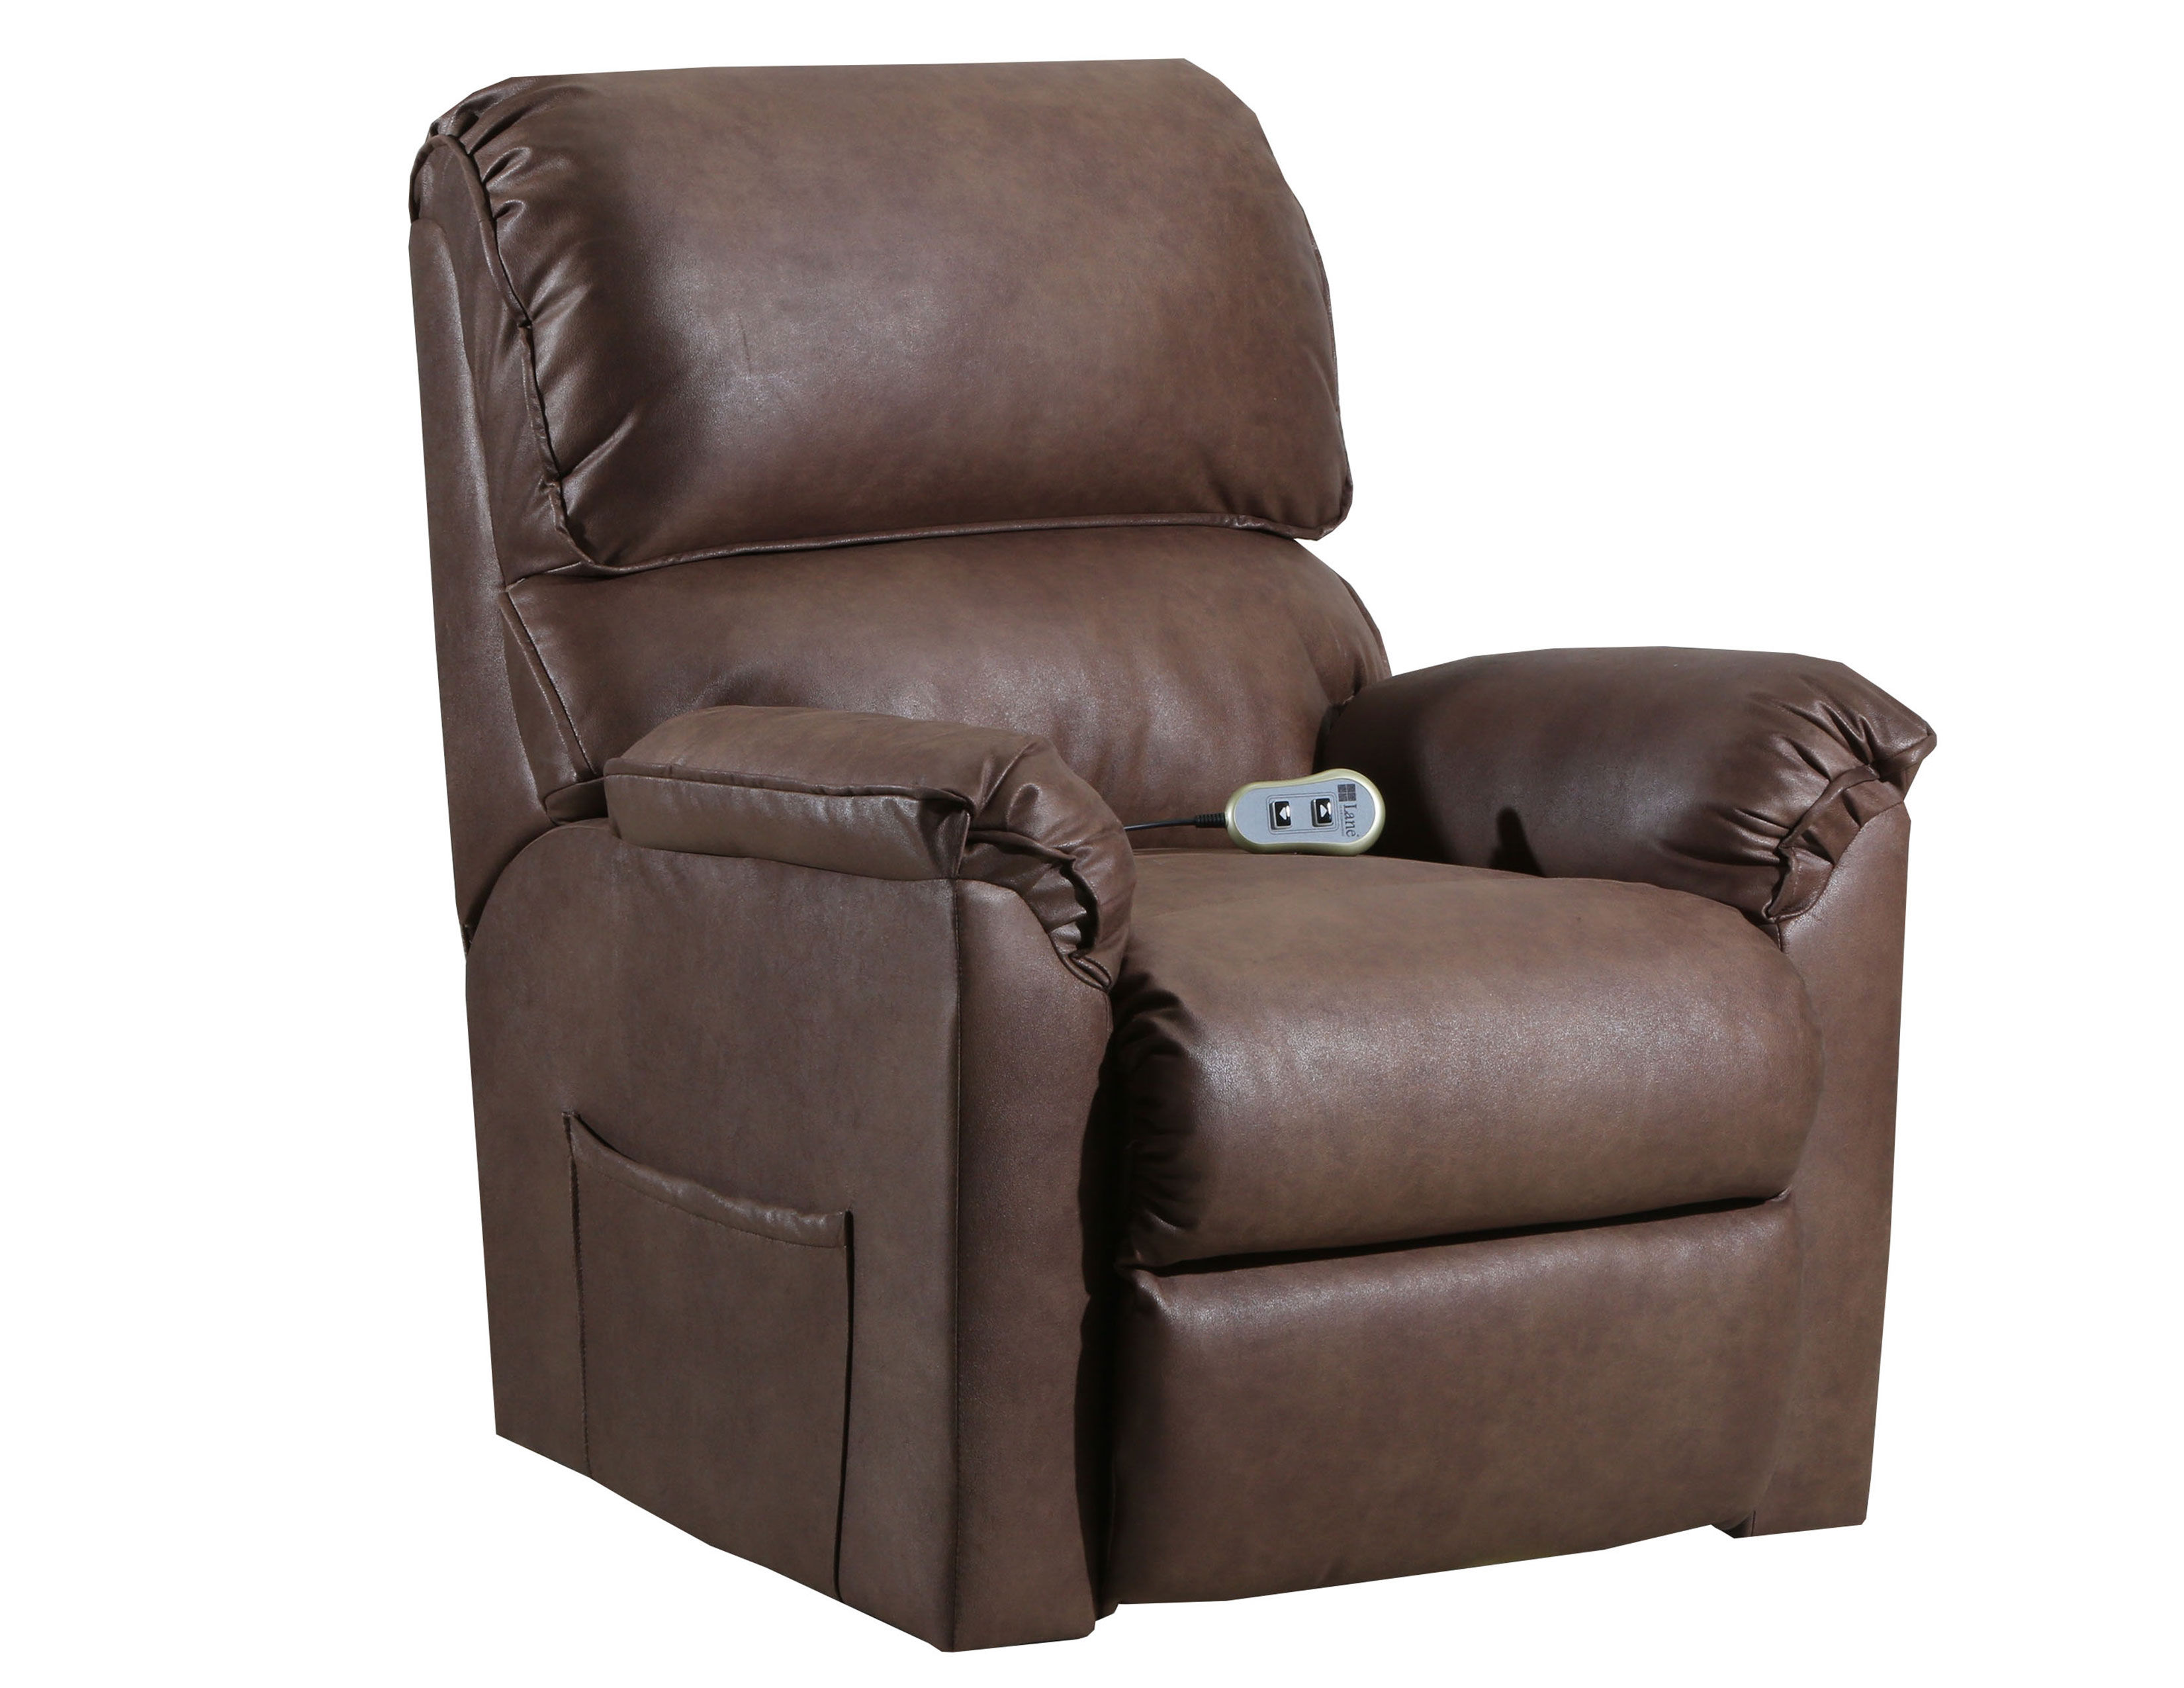 Adonis 4601 Lift Reclining Chair Rated, Warwick Leather Power Lift Recliner Chair